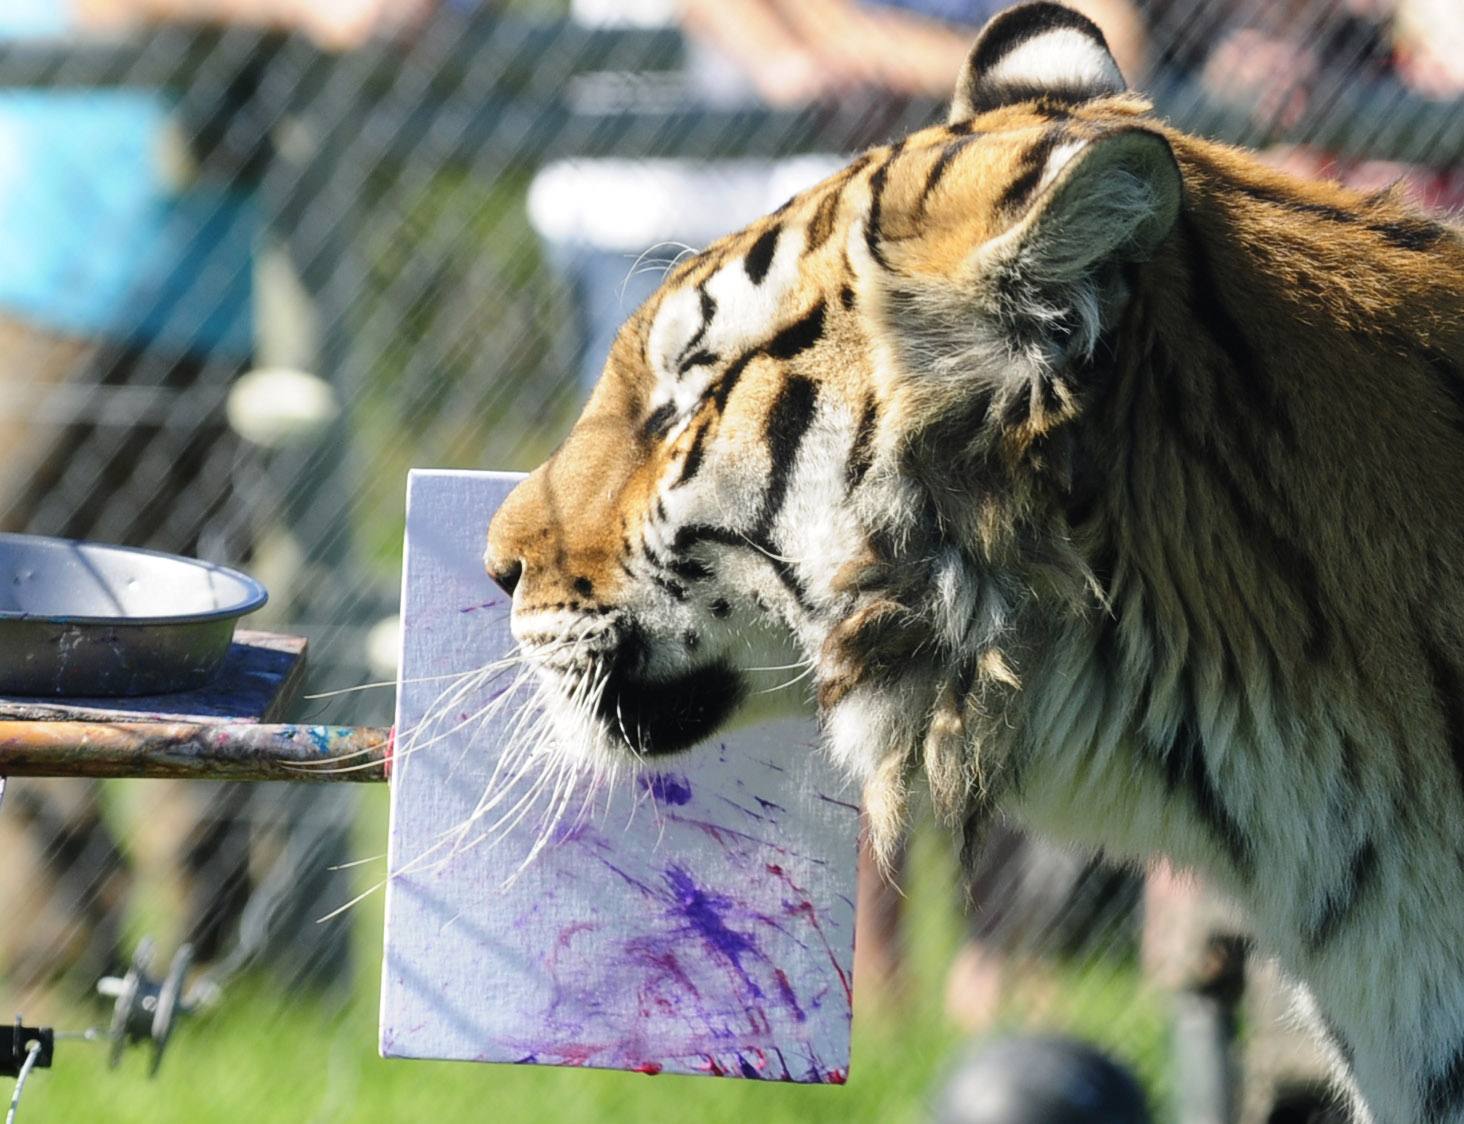 A tiger paints with its head during the tiger show at the Discovery Wildlife Park zoo in Innisfail Thursday morning. The paintings are sold in the gift shop with all proceeds going to provide the tigers with toys